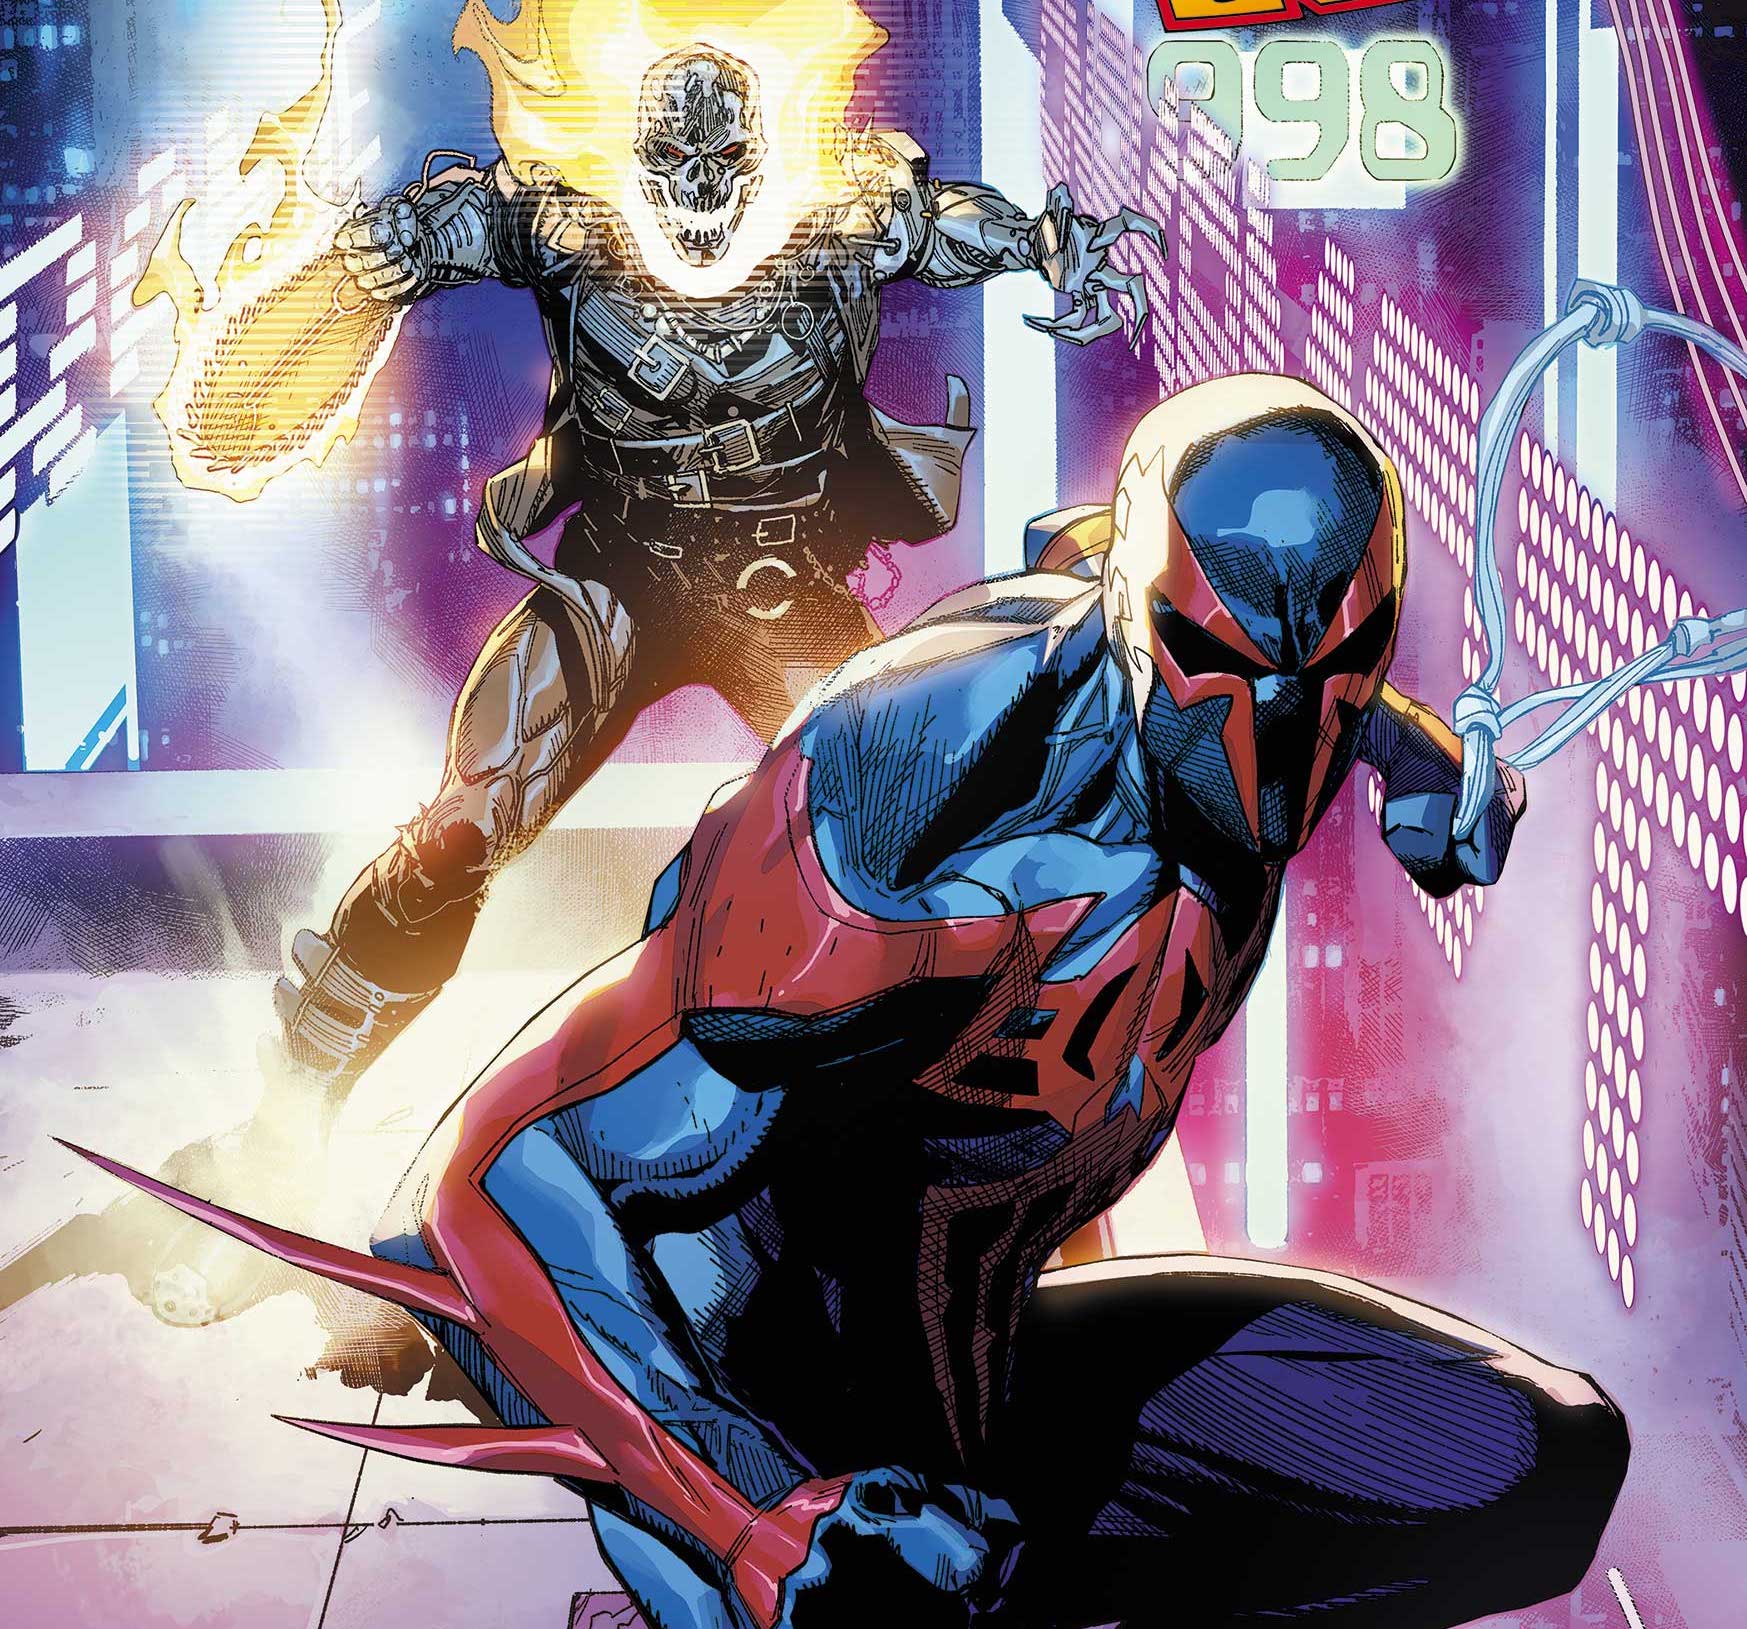 'Spider-Man 2099: Exodus – Alpha' #1 is a return to form for the title character